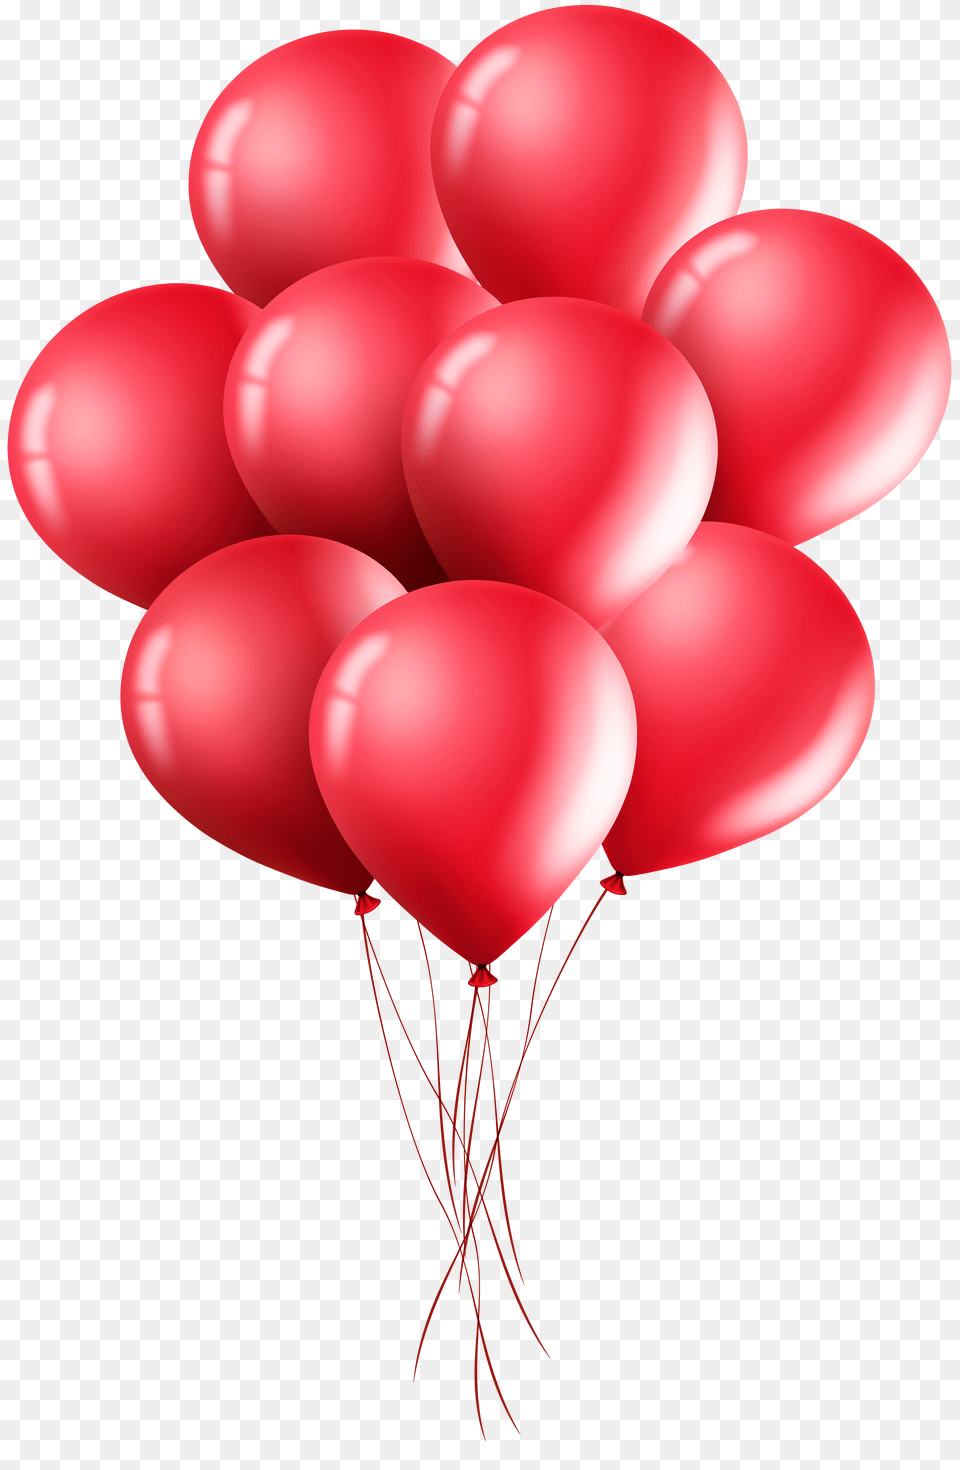 Download Clipart Balloons Red With Transparent Background, Blade, Razor, Weapon, Accessories Png Image